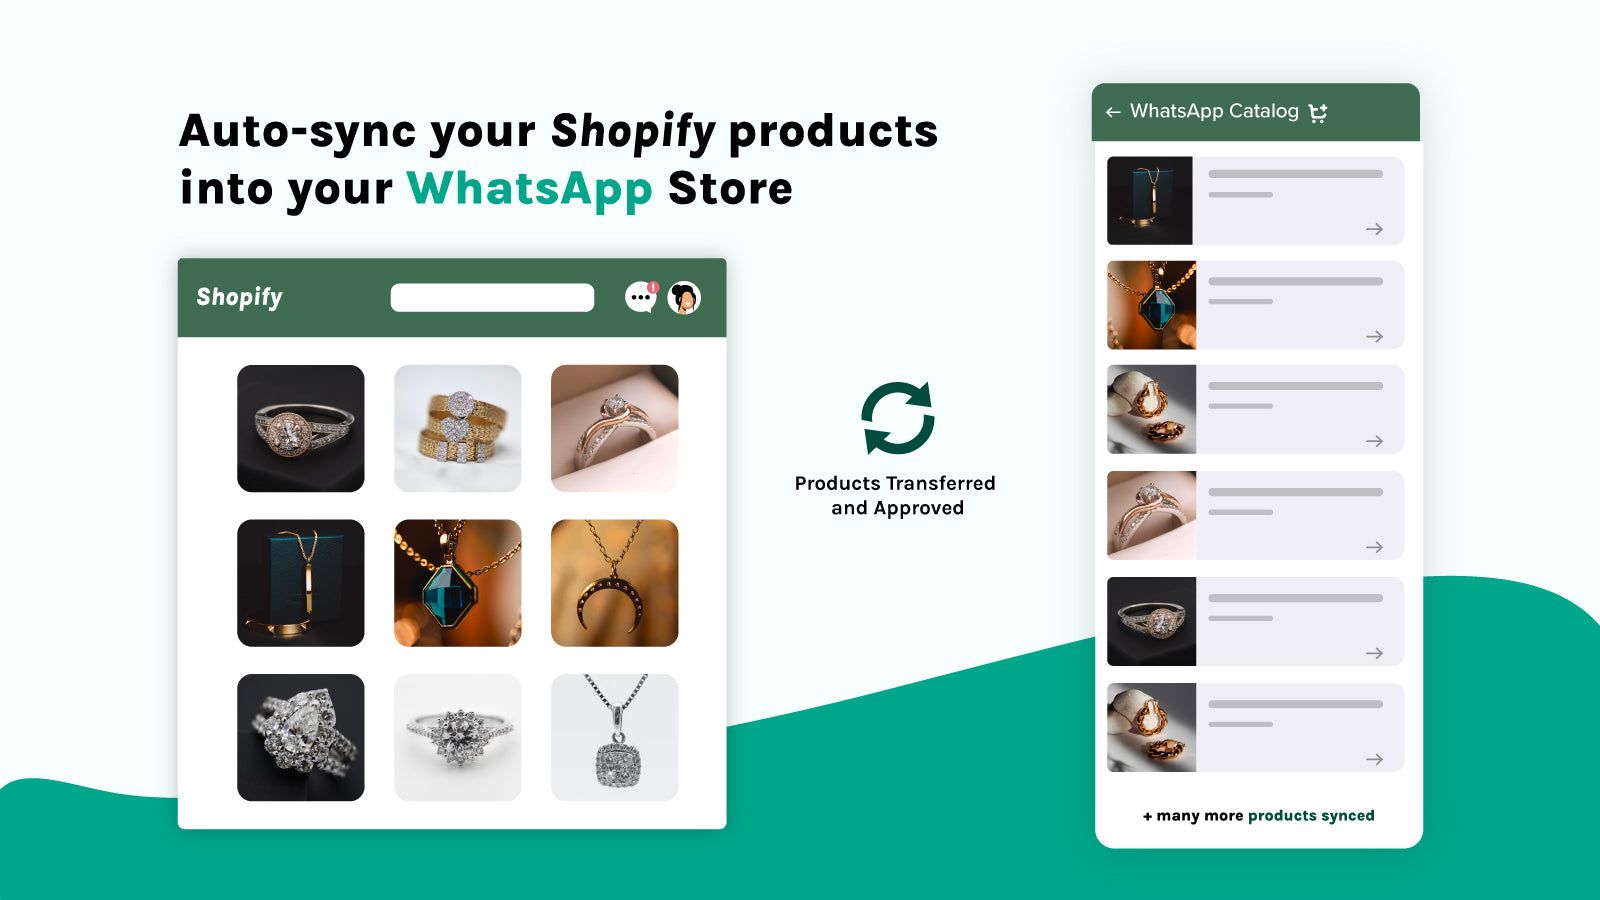 Auto-sync your products into your WhatsApp store